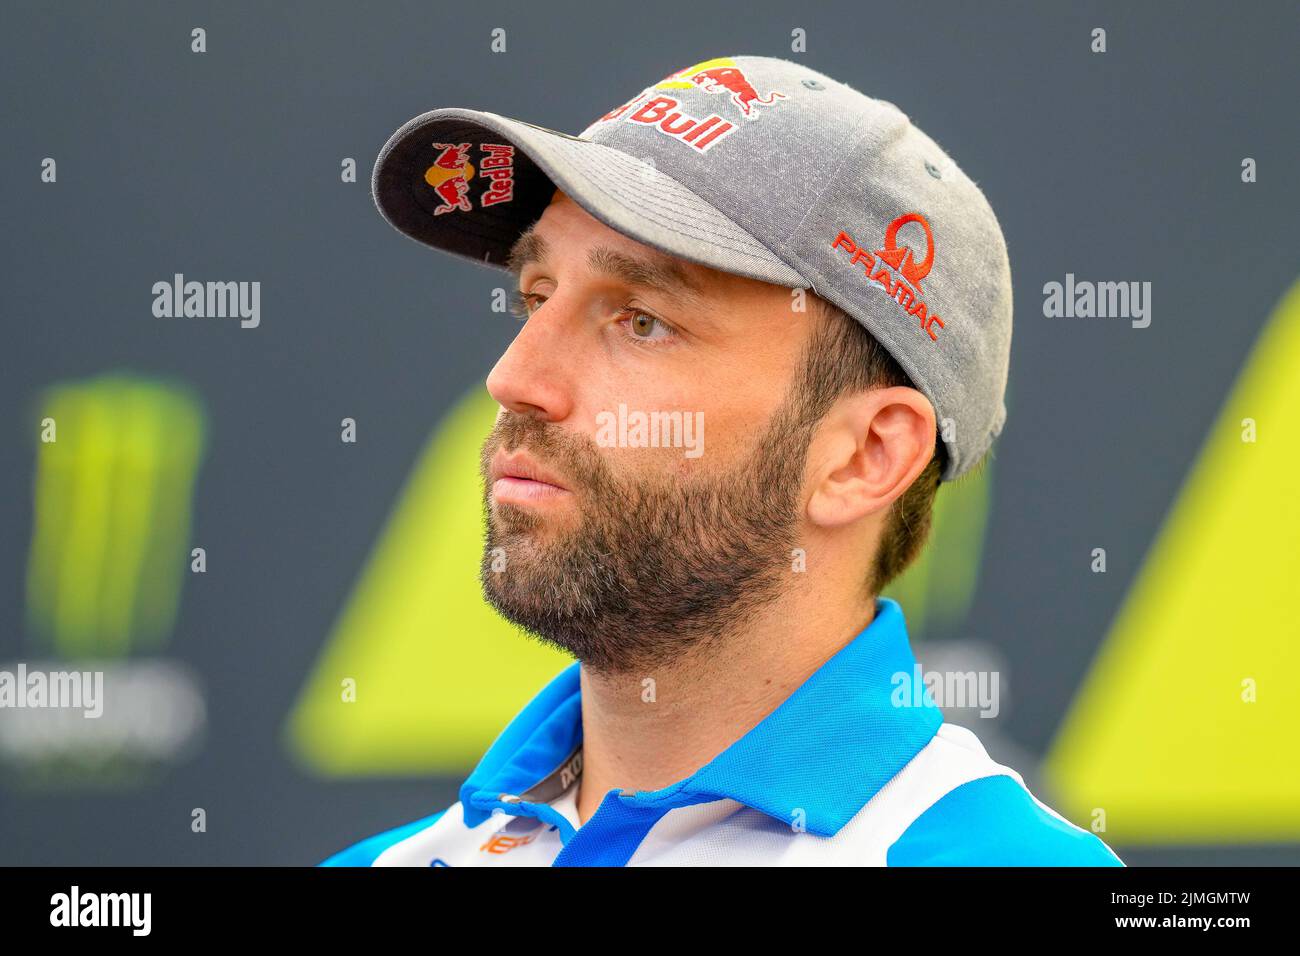 Towcester, UK. 06th Aug, 2022. Johann ZARCO (France) of the Prima Pramac Racing Ducati Team during the 2022 Monster Energy Grand Prix Qualification Press Conference at Silverstone Circuit, Towcester, England on the 6th August 2022. Photo by David Horn. Credit: PRiME Media Images/Alamy Live News Stock Photo